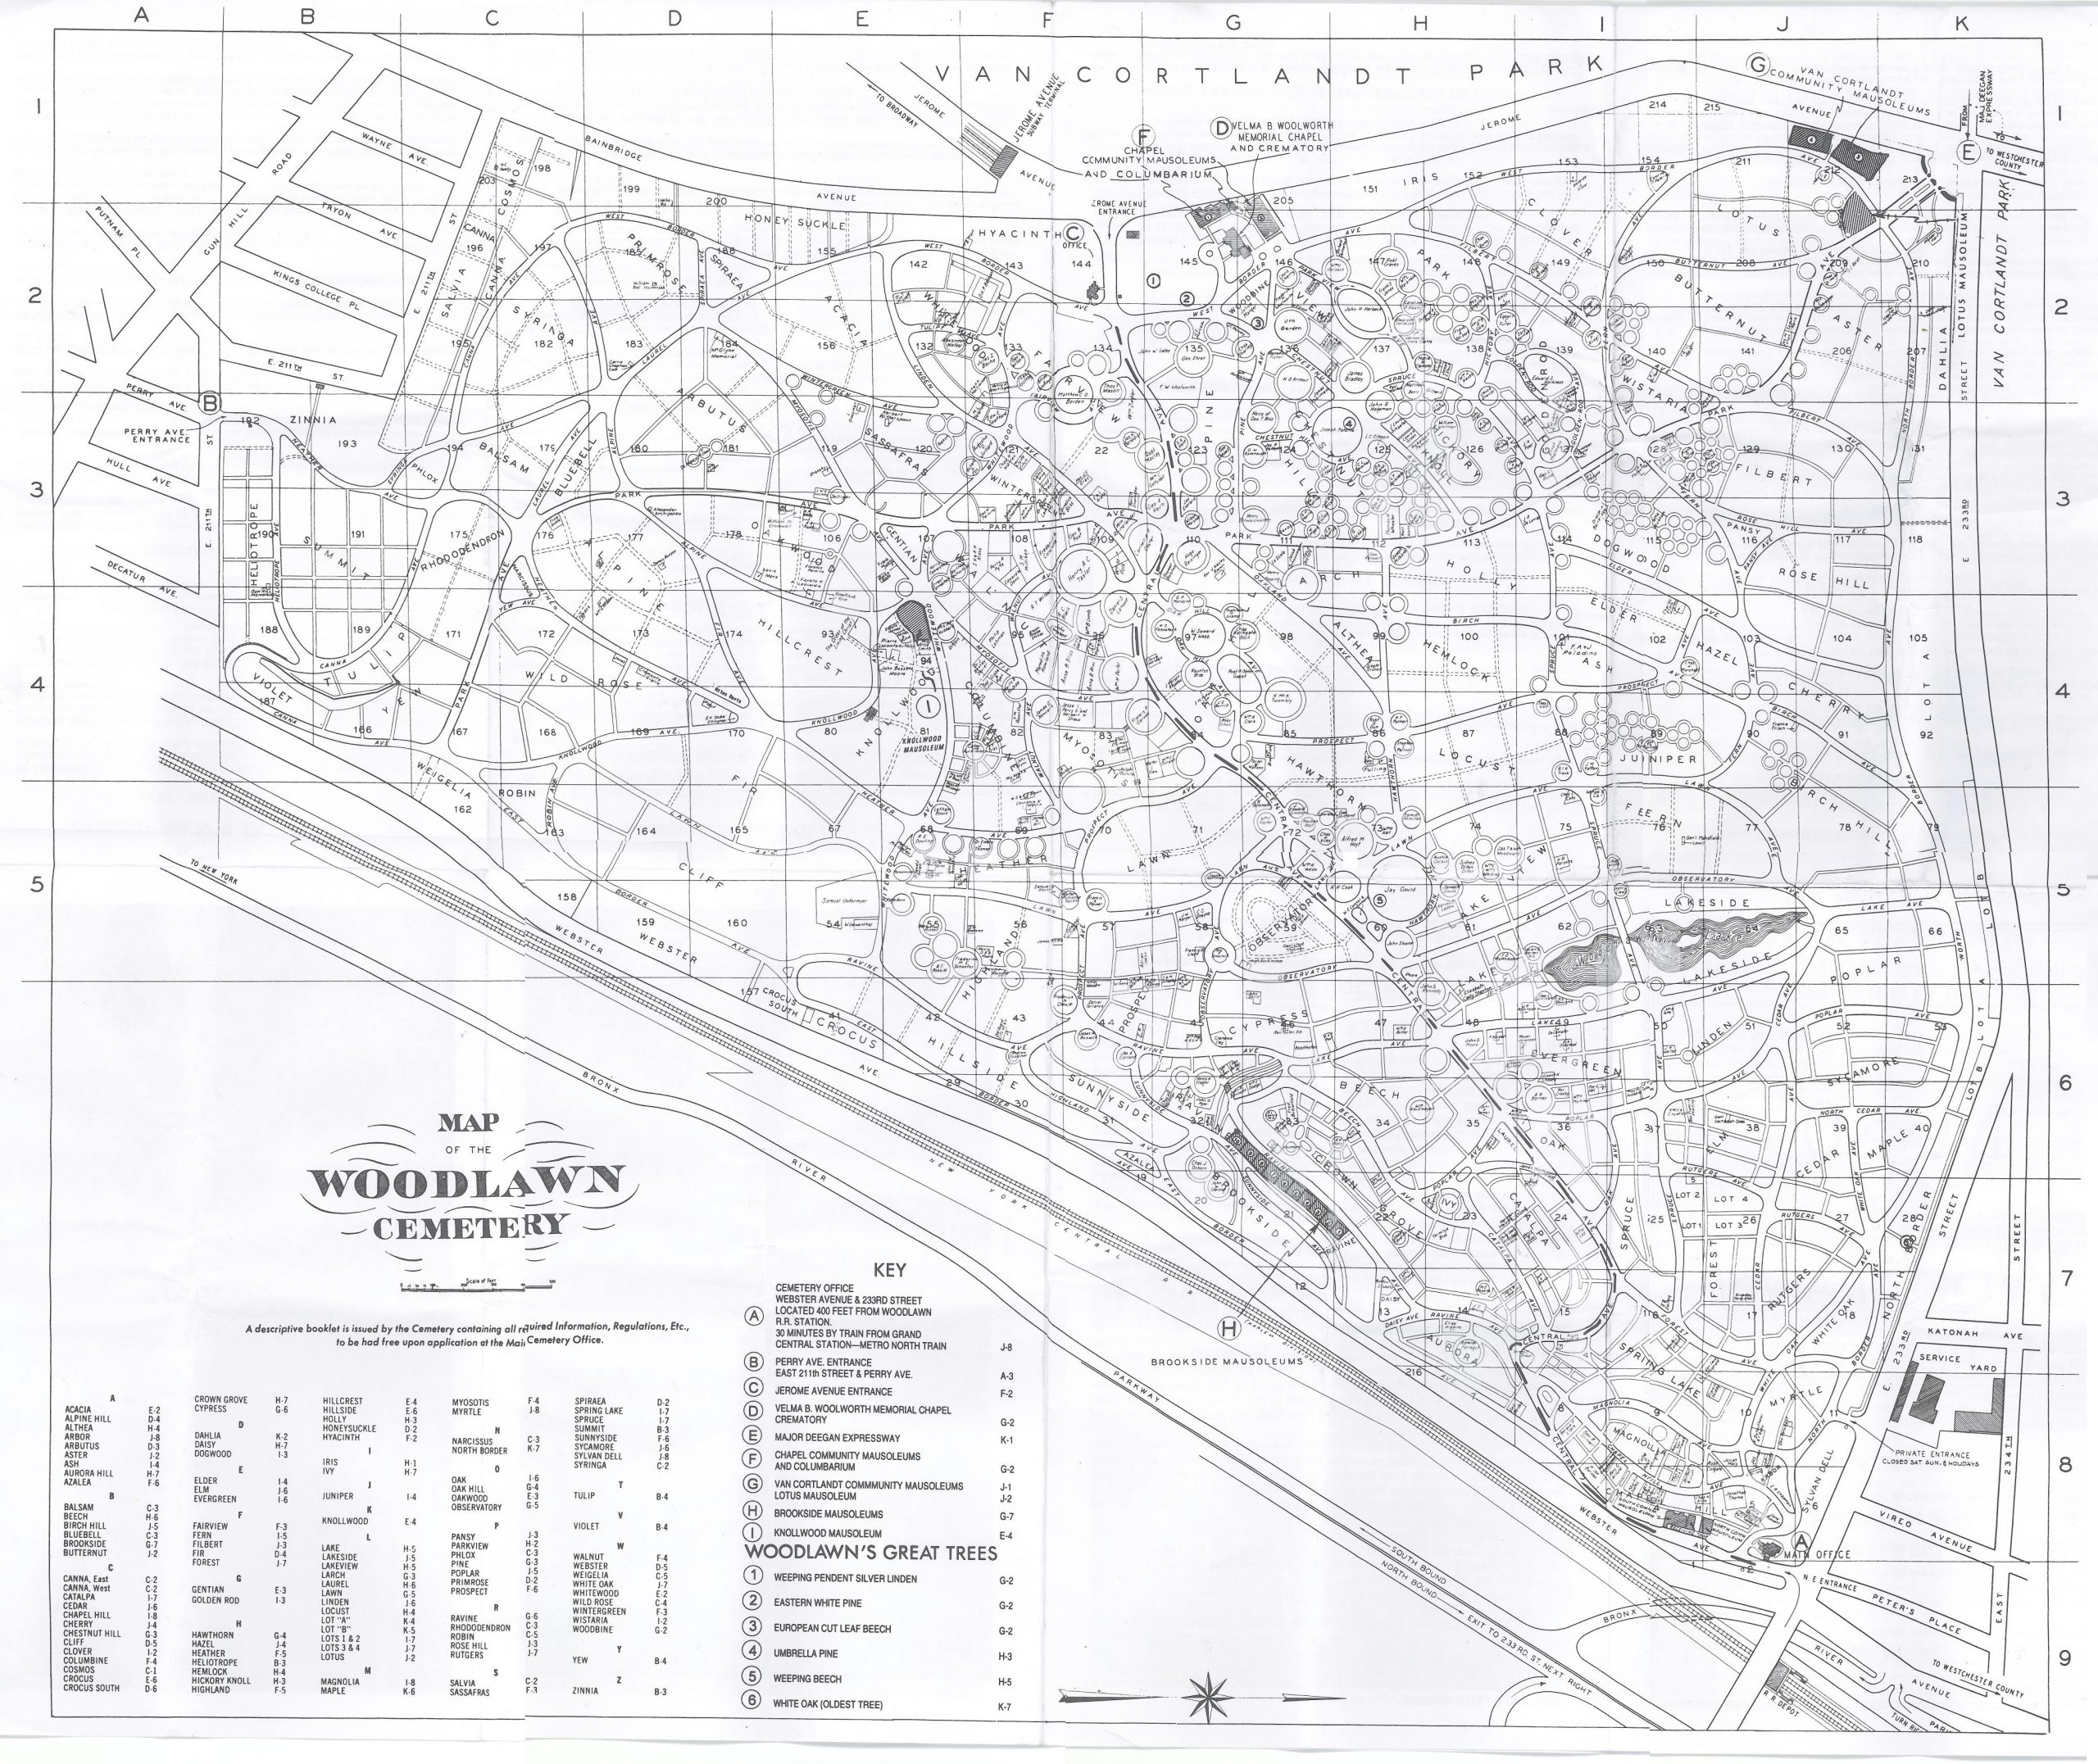 Map of Woodlawn Cemetery in the Bronx, New York City